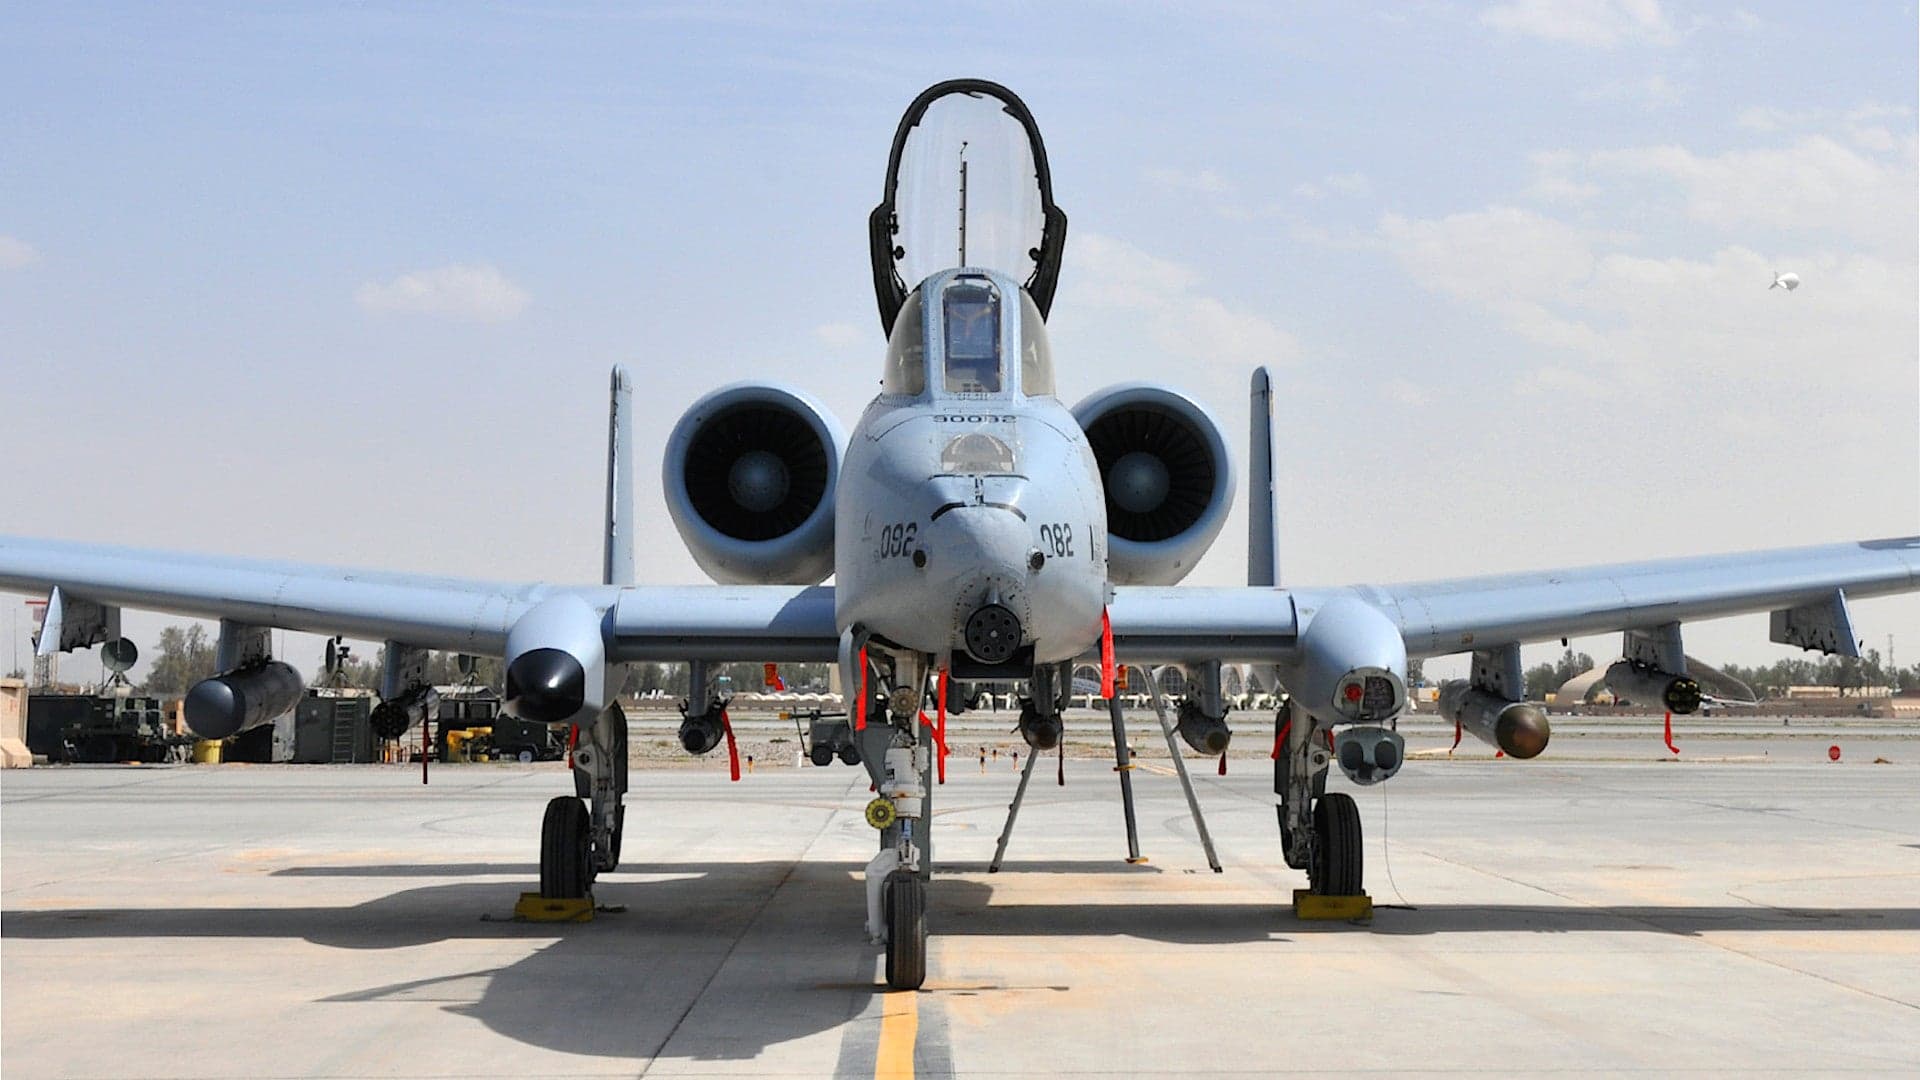 Battle Damaged A-10 Warthog Gets Back In The Fight With Help From A Little Telemedicine